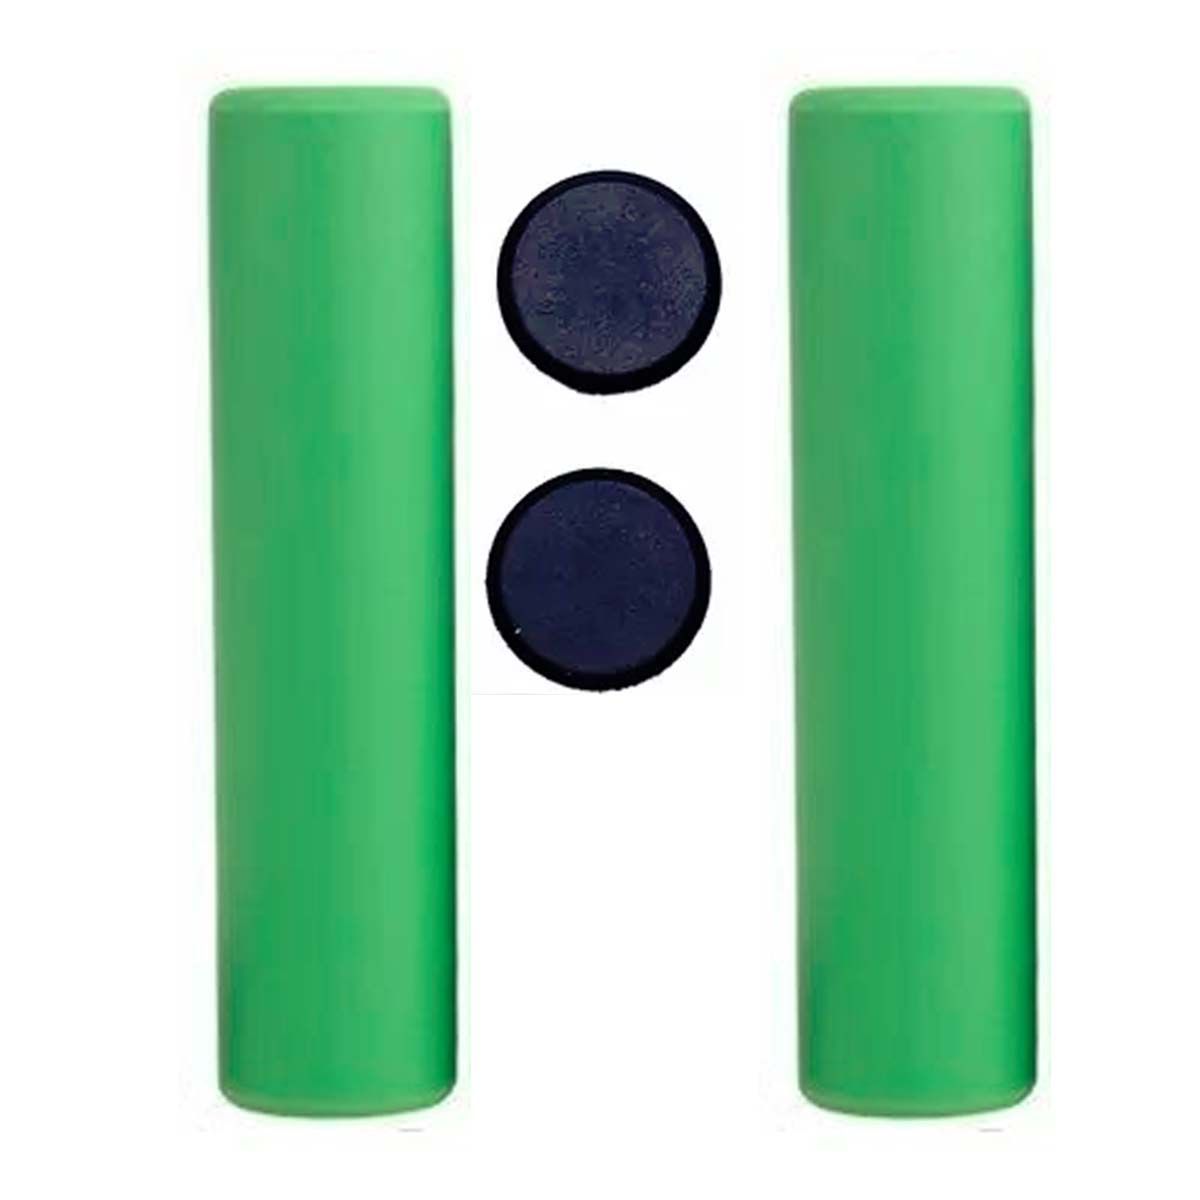 Manopla High One Silicone 135mm C/ Plugs Verde